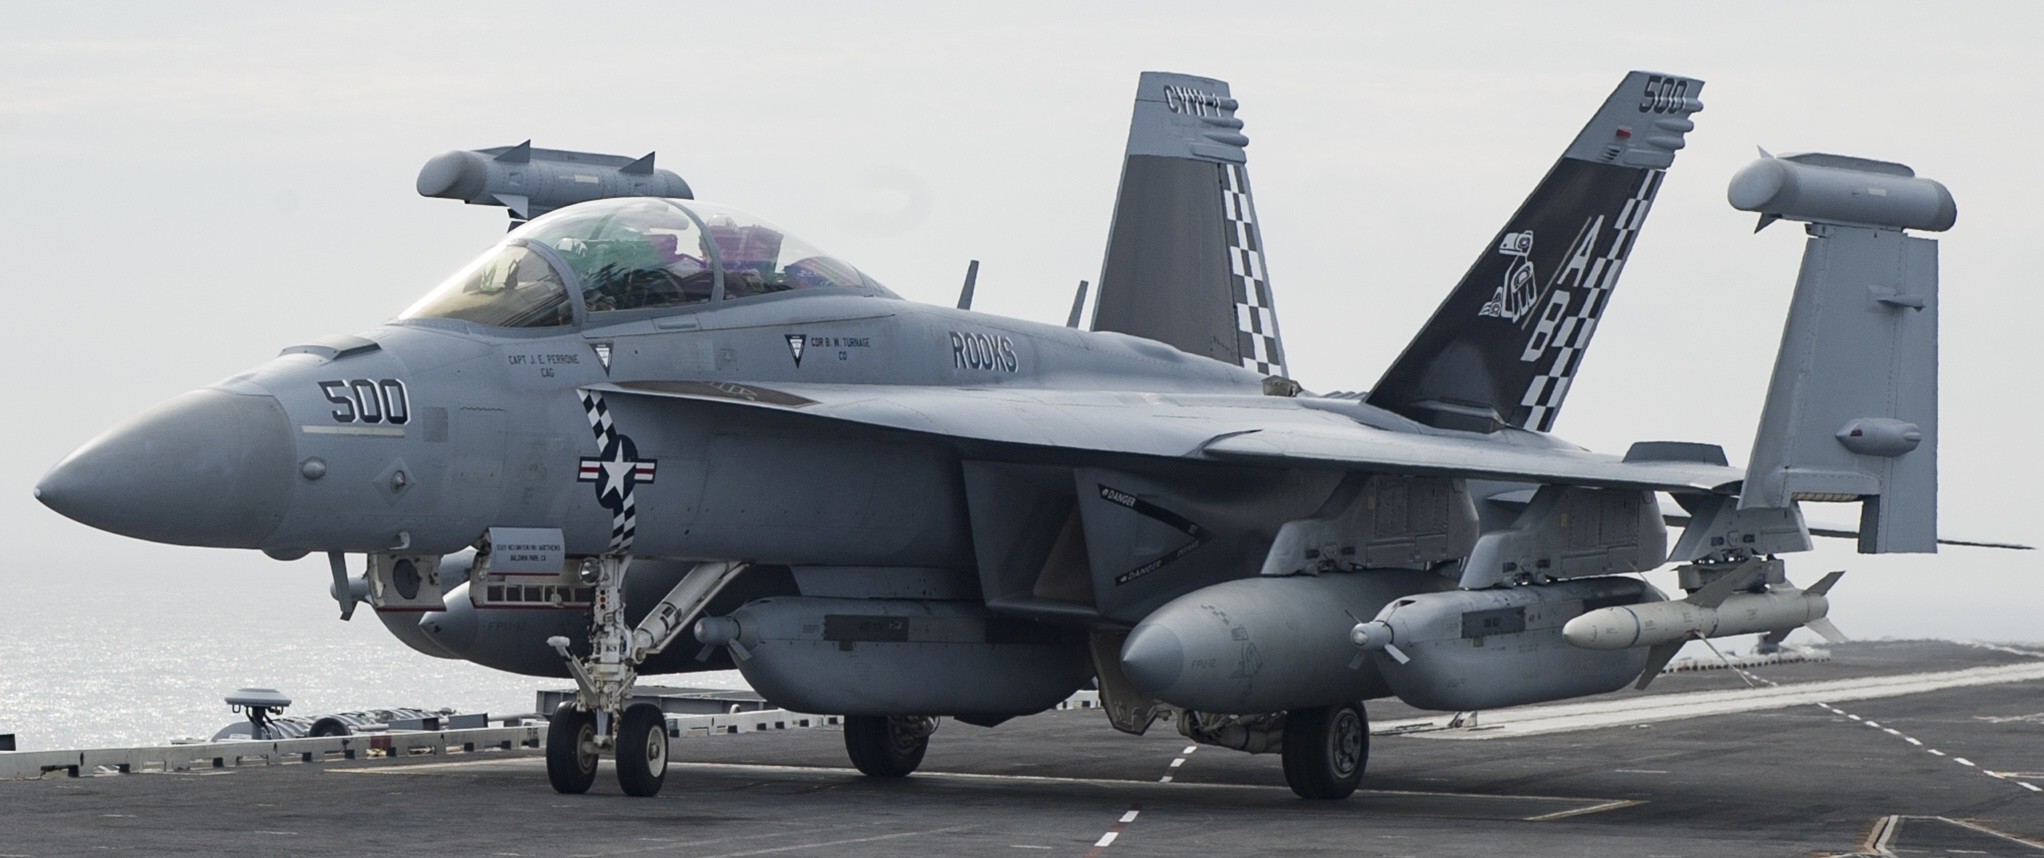 vaq-137 rooks electronic attack squadron us navy ea-18g growler carrier air wing cvw-1 uss harry s. truman cvn-75 61